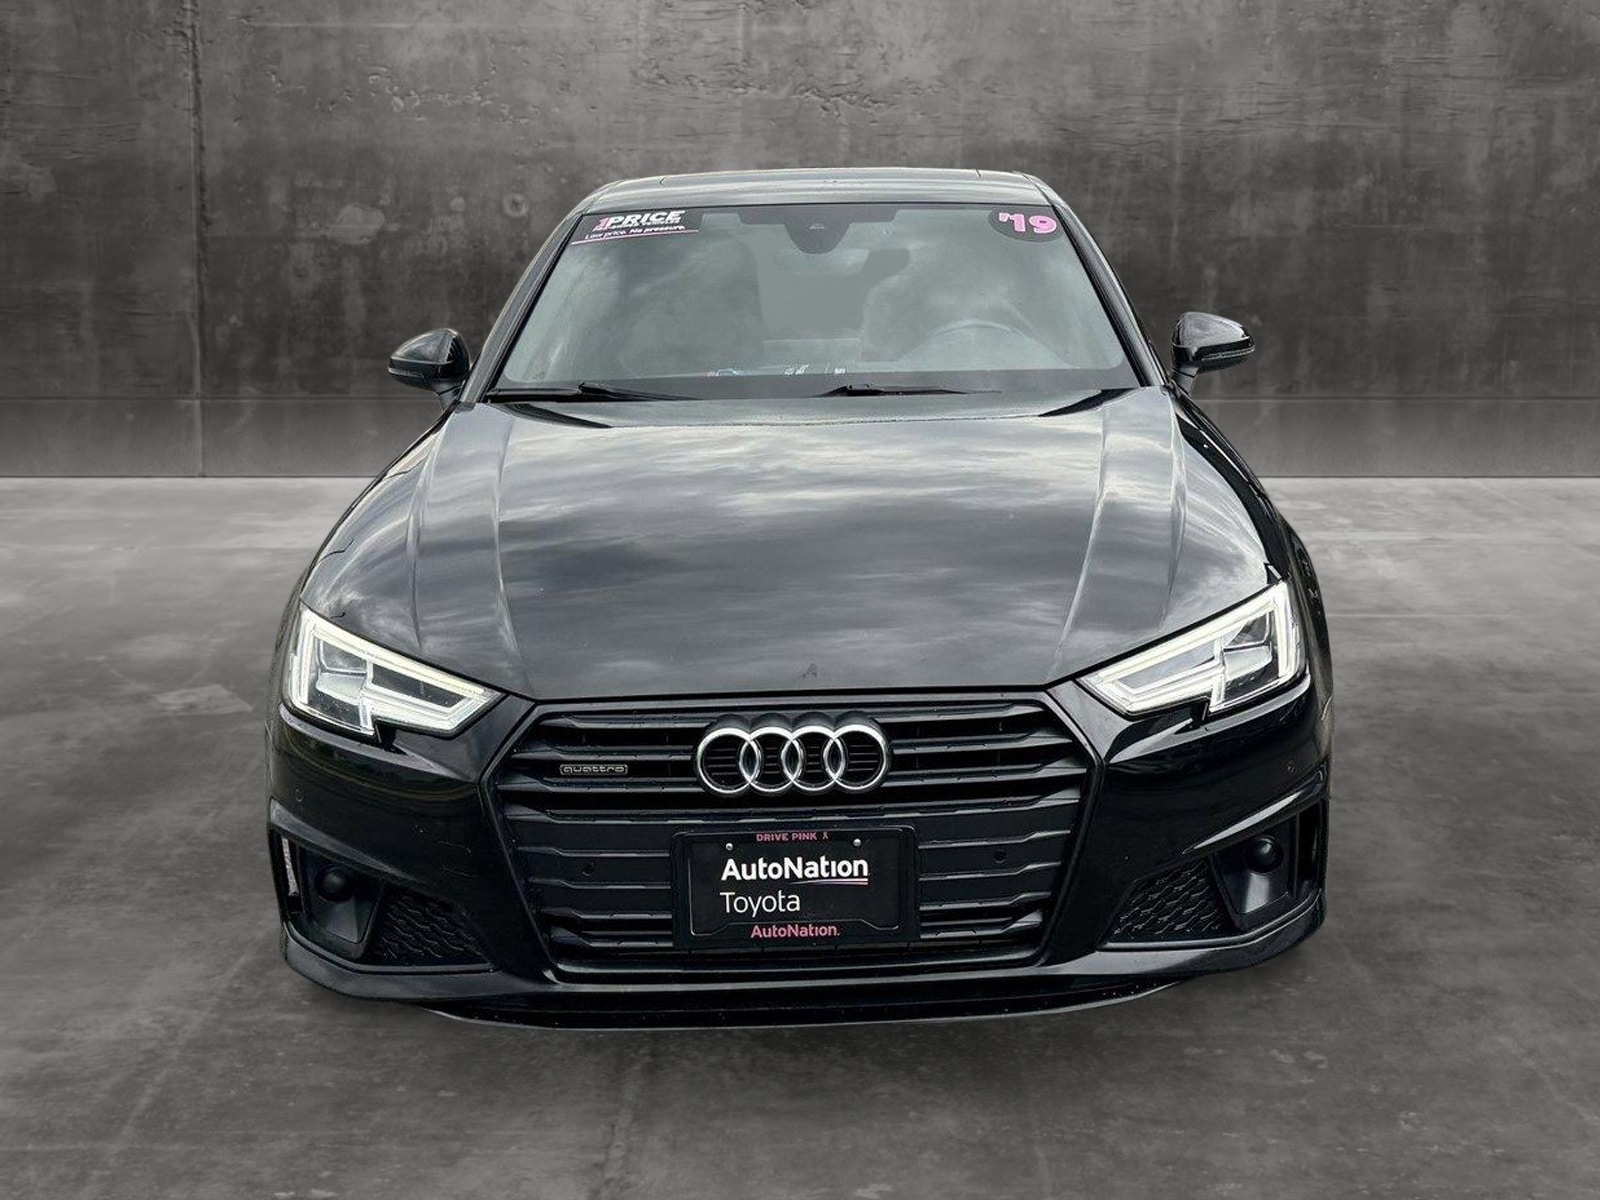 Used 2019 Audi A4 Premium Plus with VIN WAUENAF46KA045753 for sale in Centennial, CO